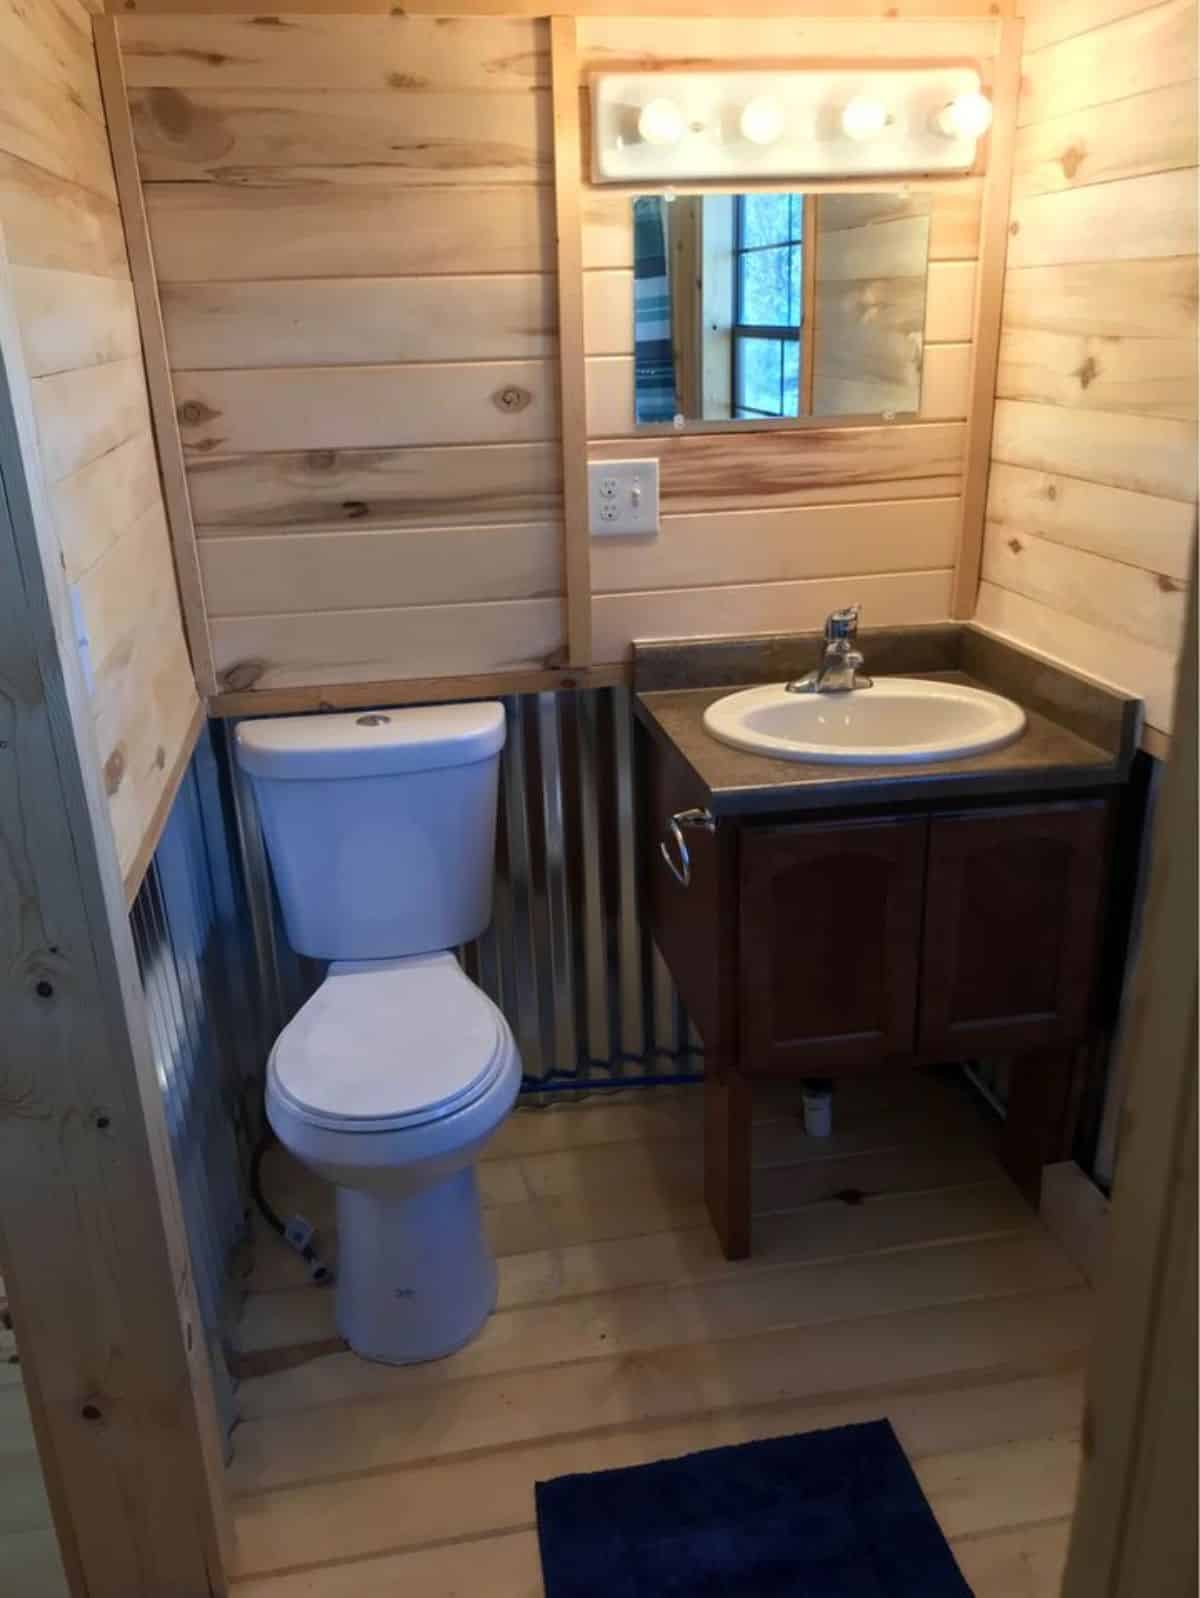 standard fittings in bathroom of $55k double lofted tiny home